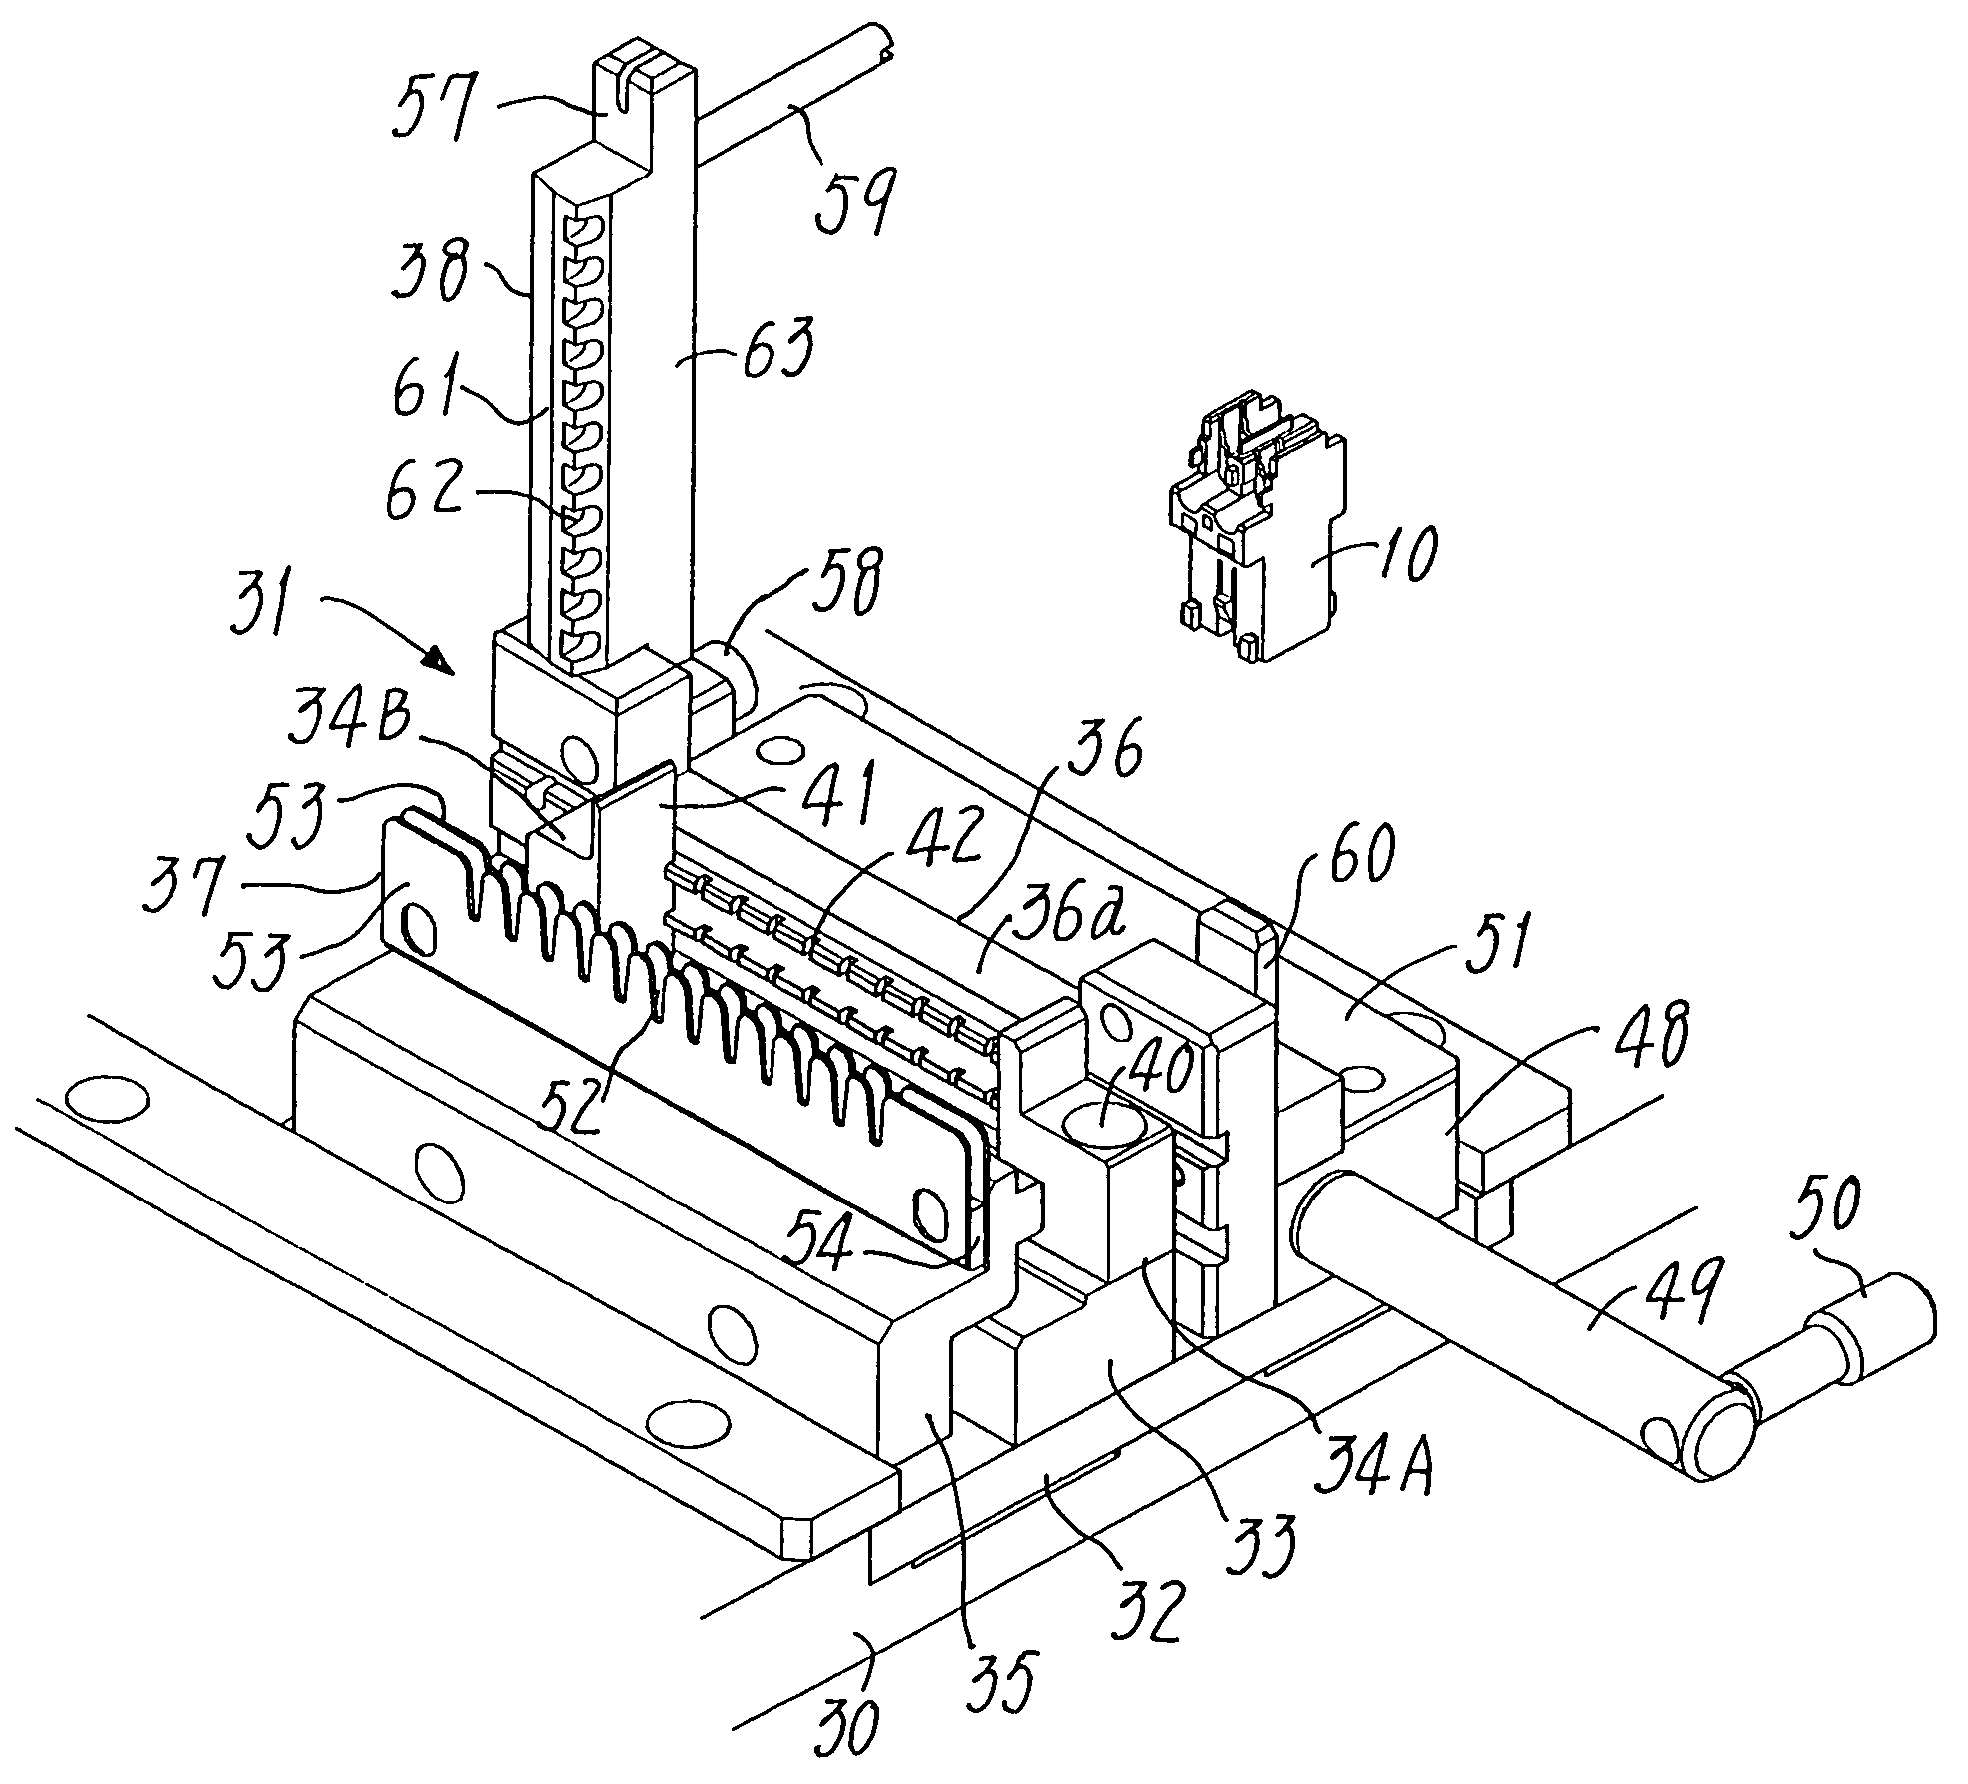 Manual machine for attaching an insulation displacement type connector